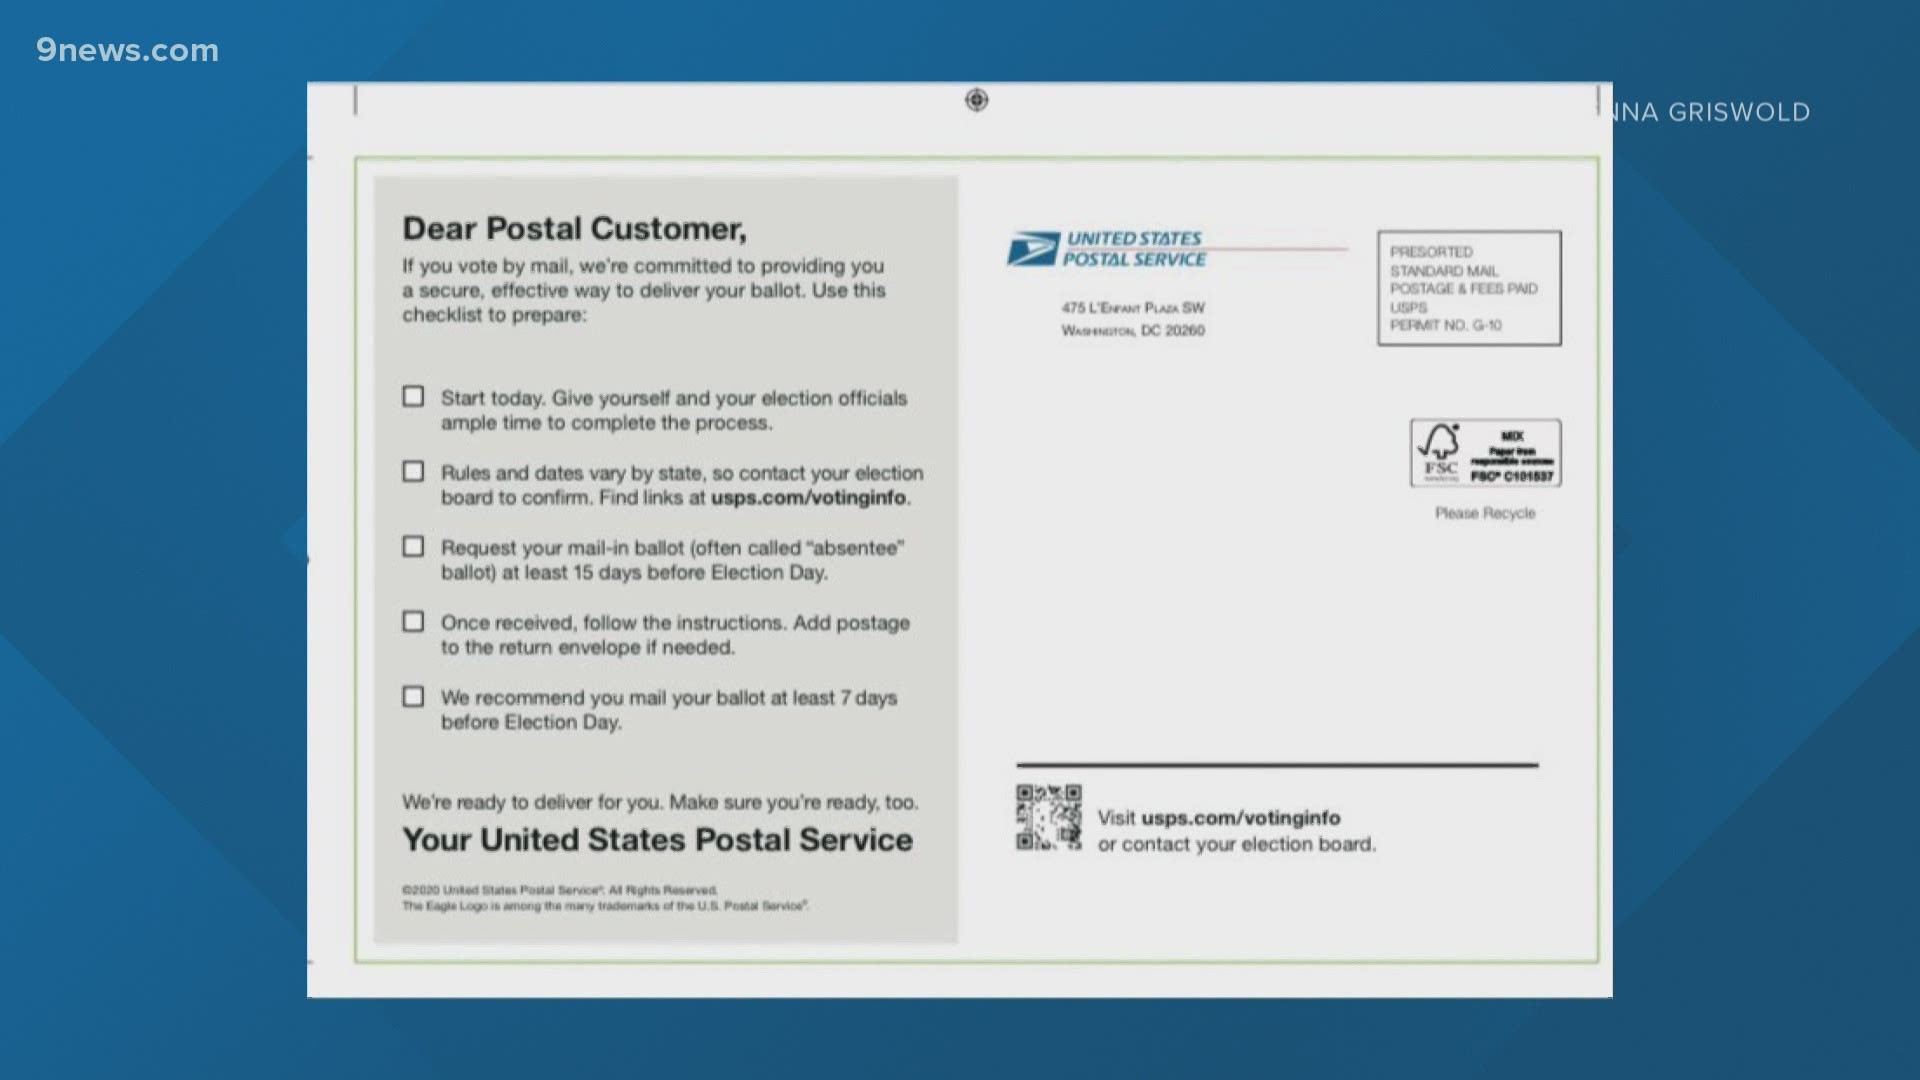 The postcard says that voters should request a mail-in ballot. In Colorado, all registered voters are automatically sent a ballot.